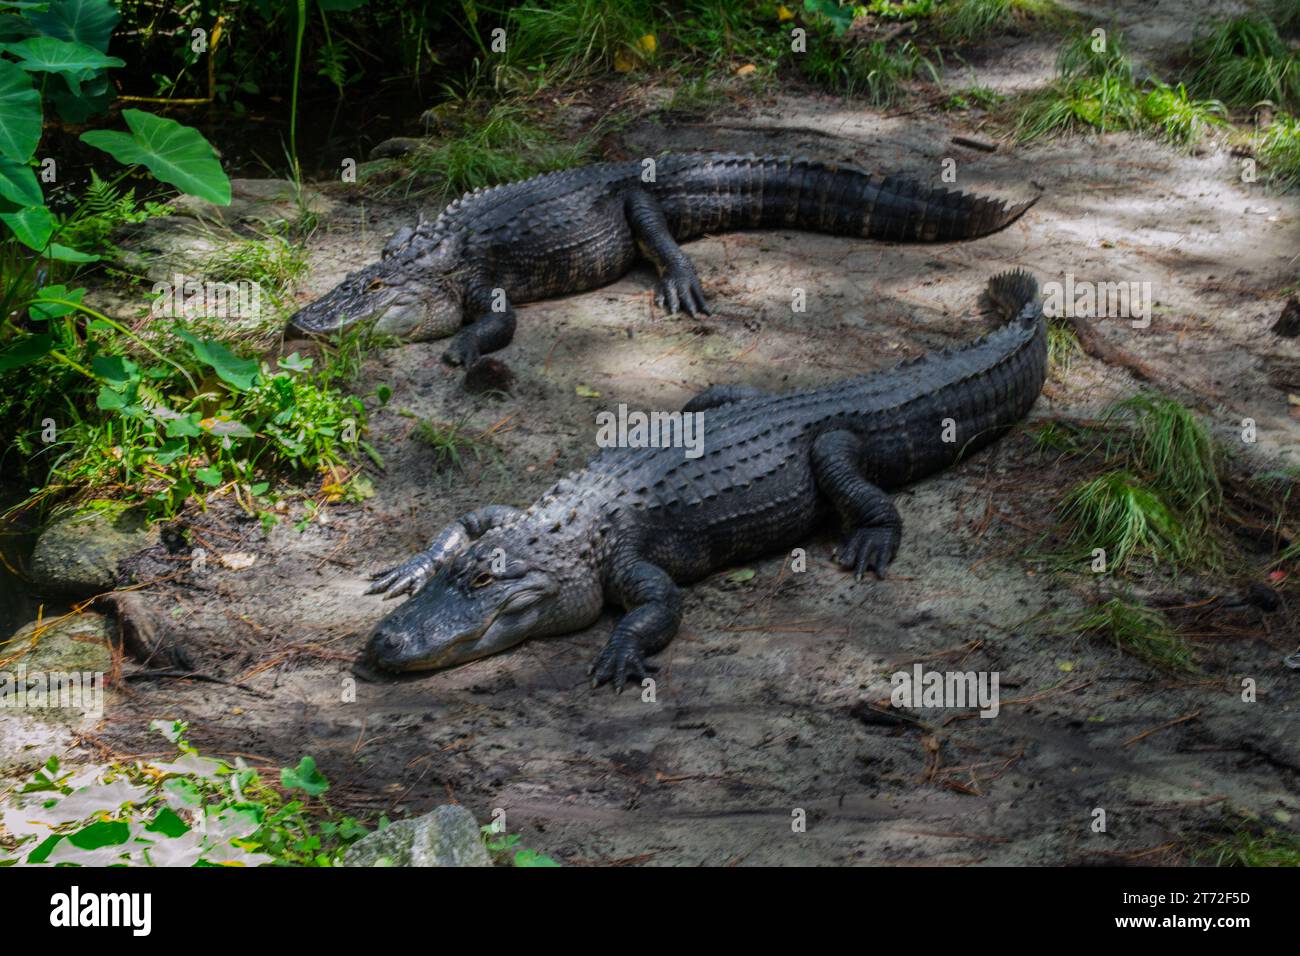 Two Alligators in the sand from above Stock Photo